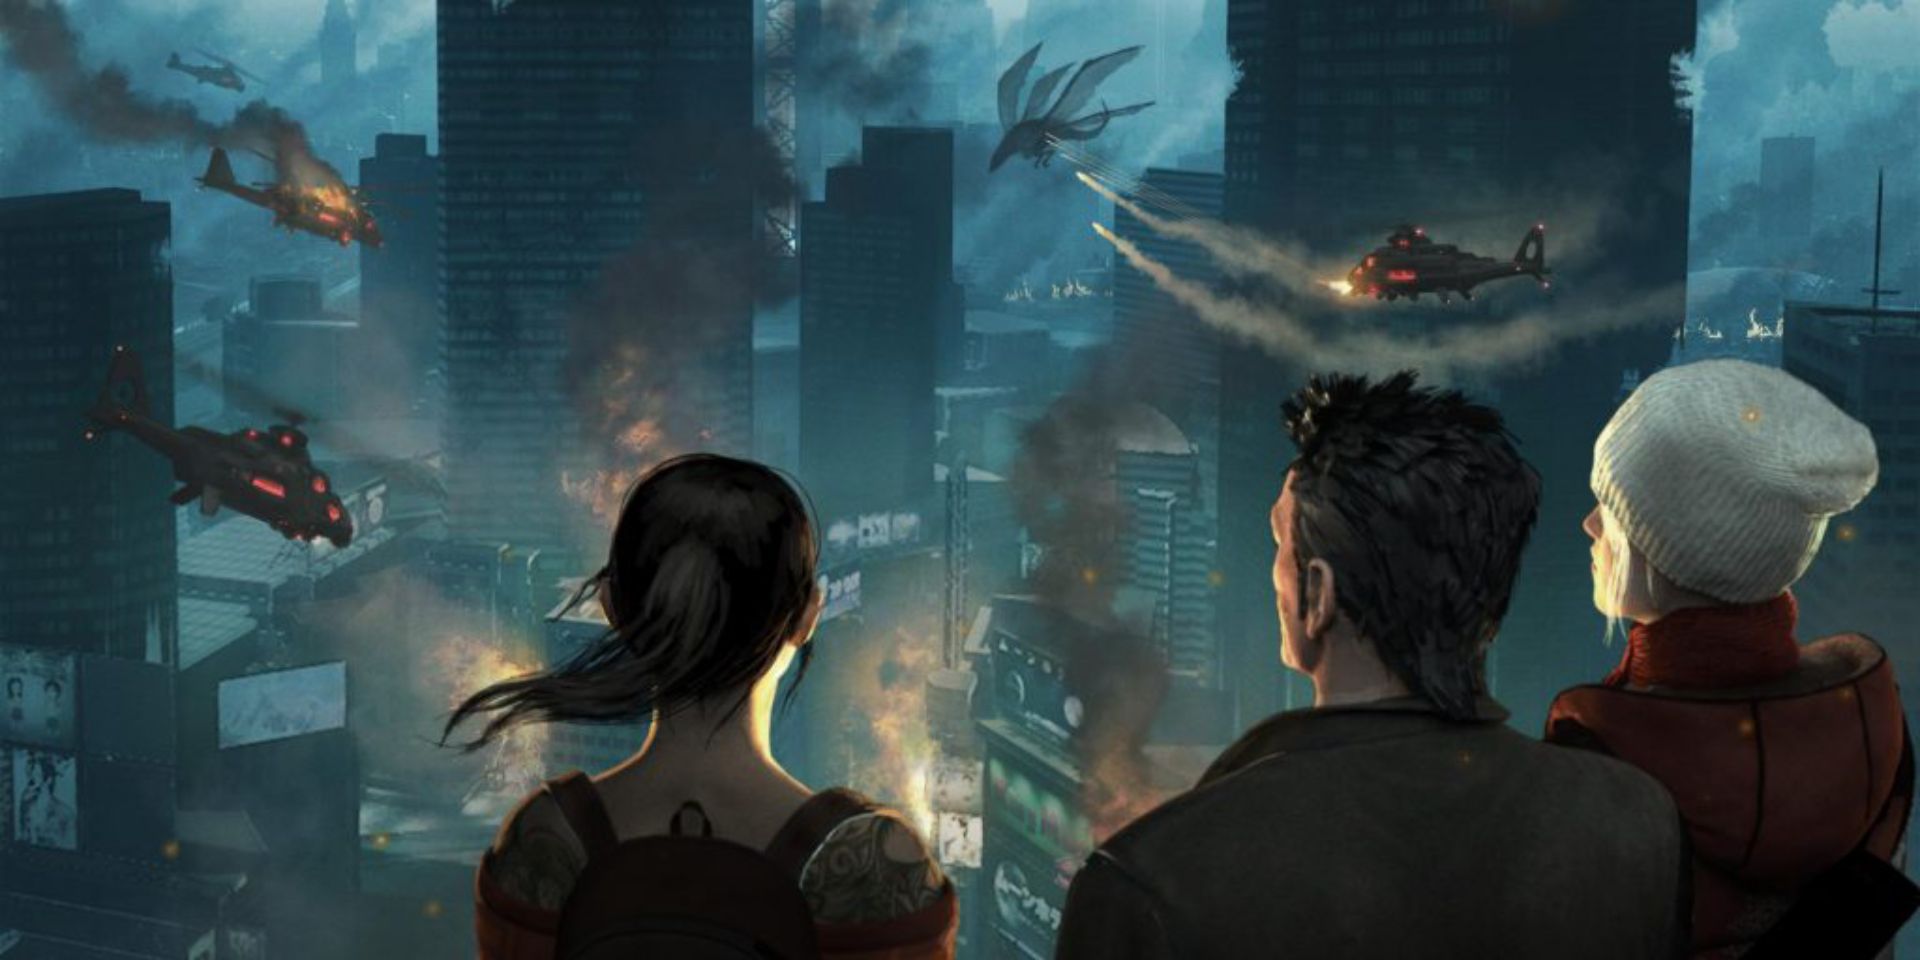 Why Urban Fantasy Games Are More Prevalent in Japan Than In The US